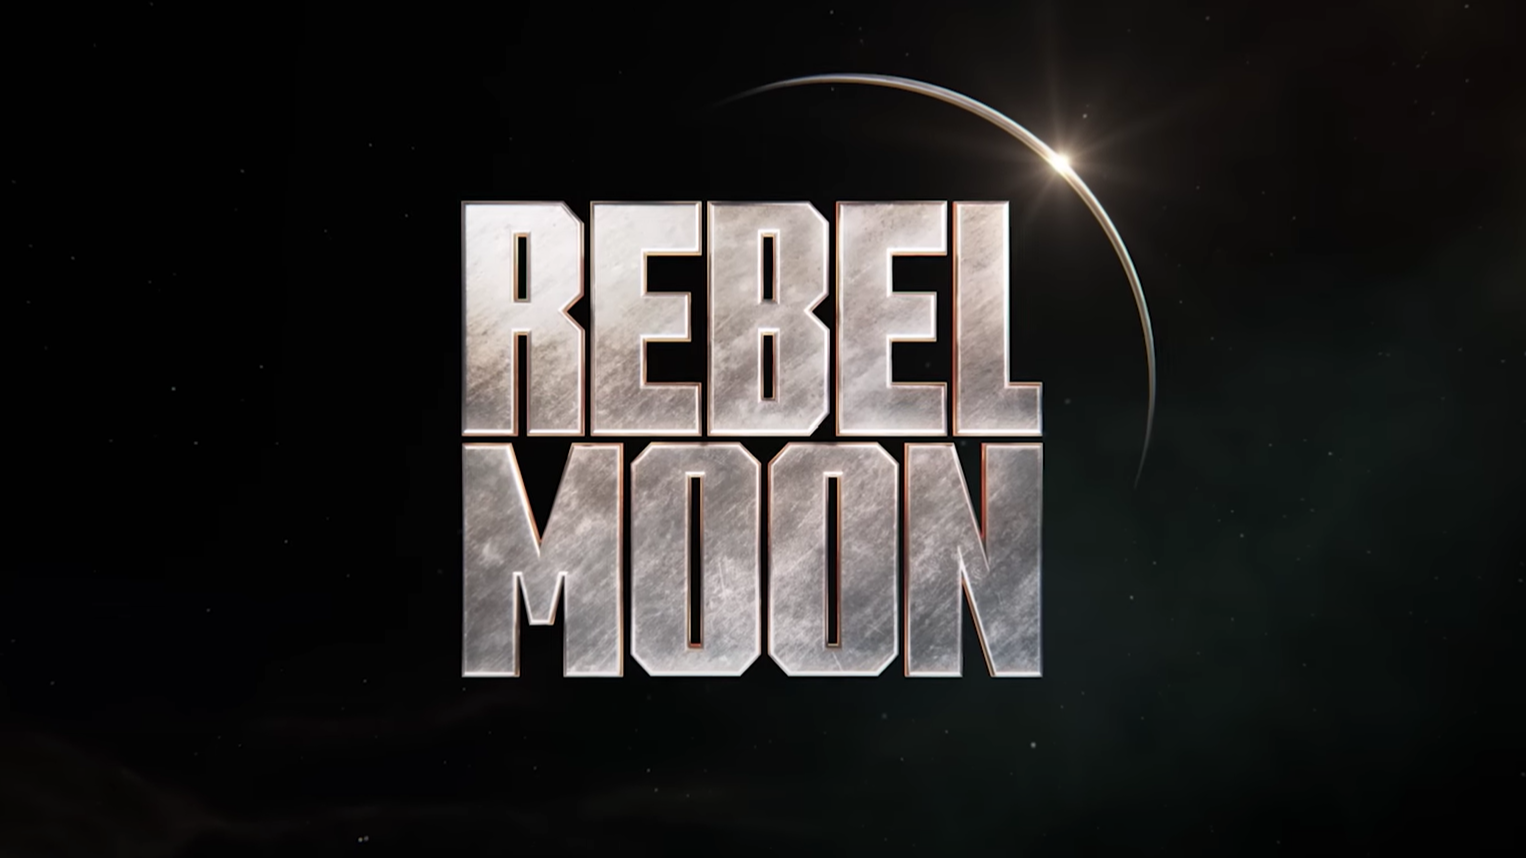 Is Rebel Moon destined to miss its day in the Sun? – The Cultured Nerd